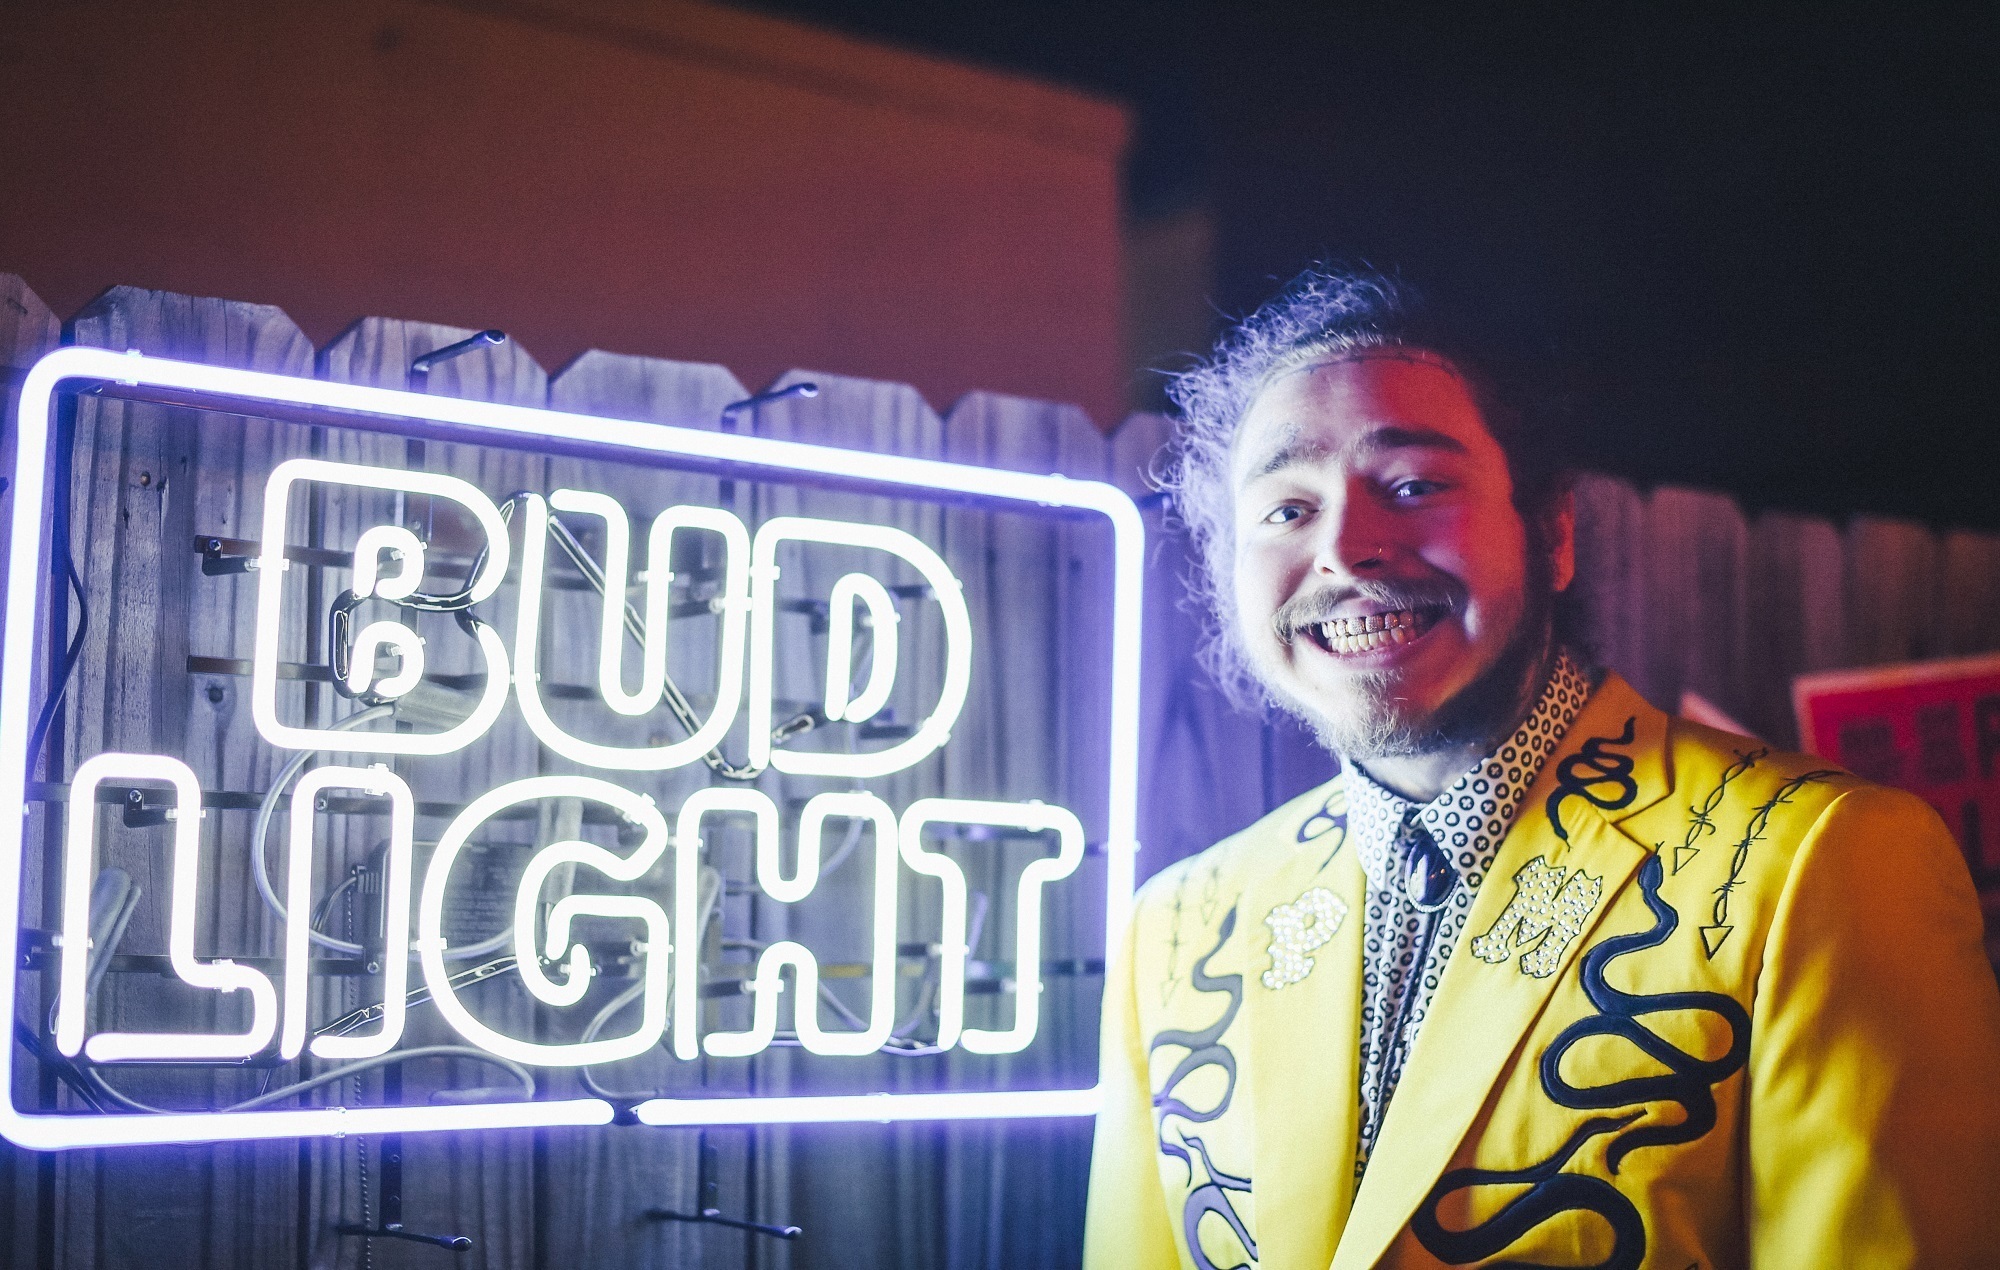 Post Malone collaboration with Bud Light! Fans look forward to the